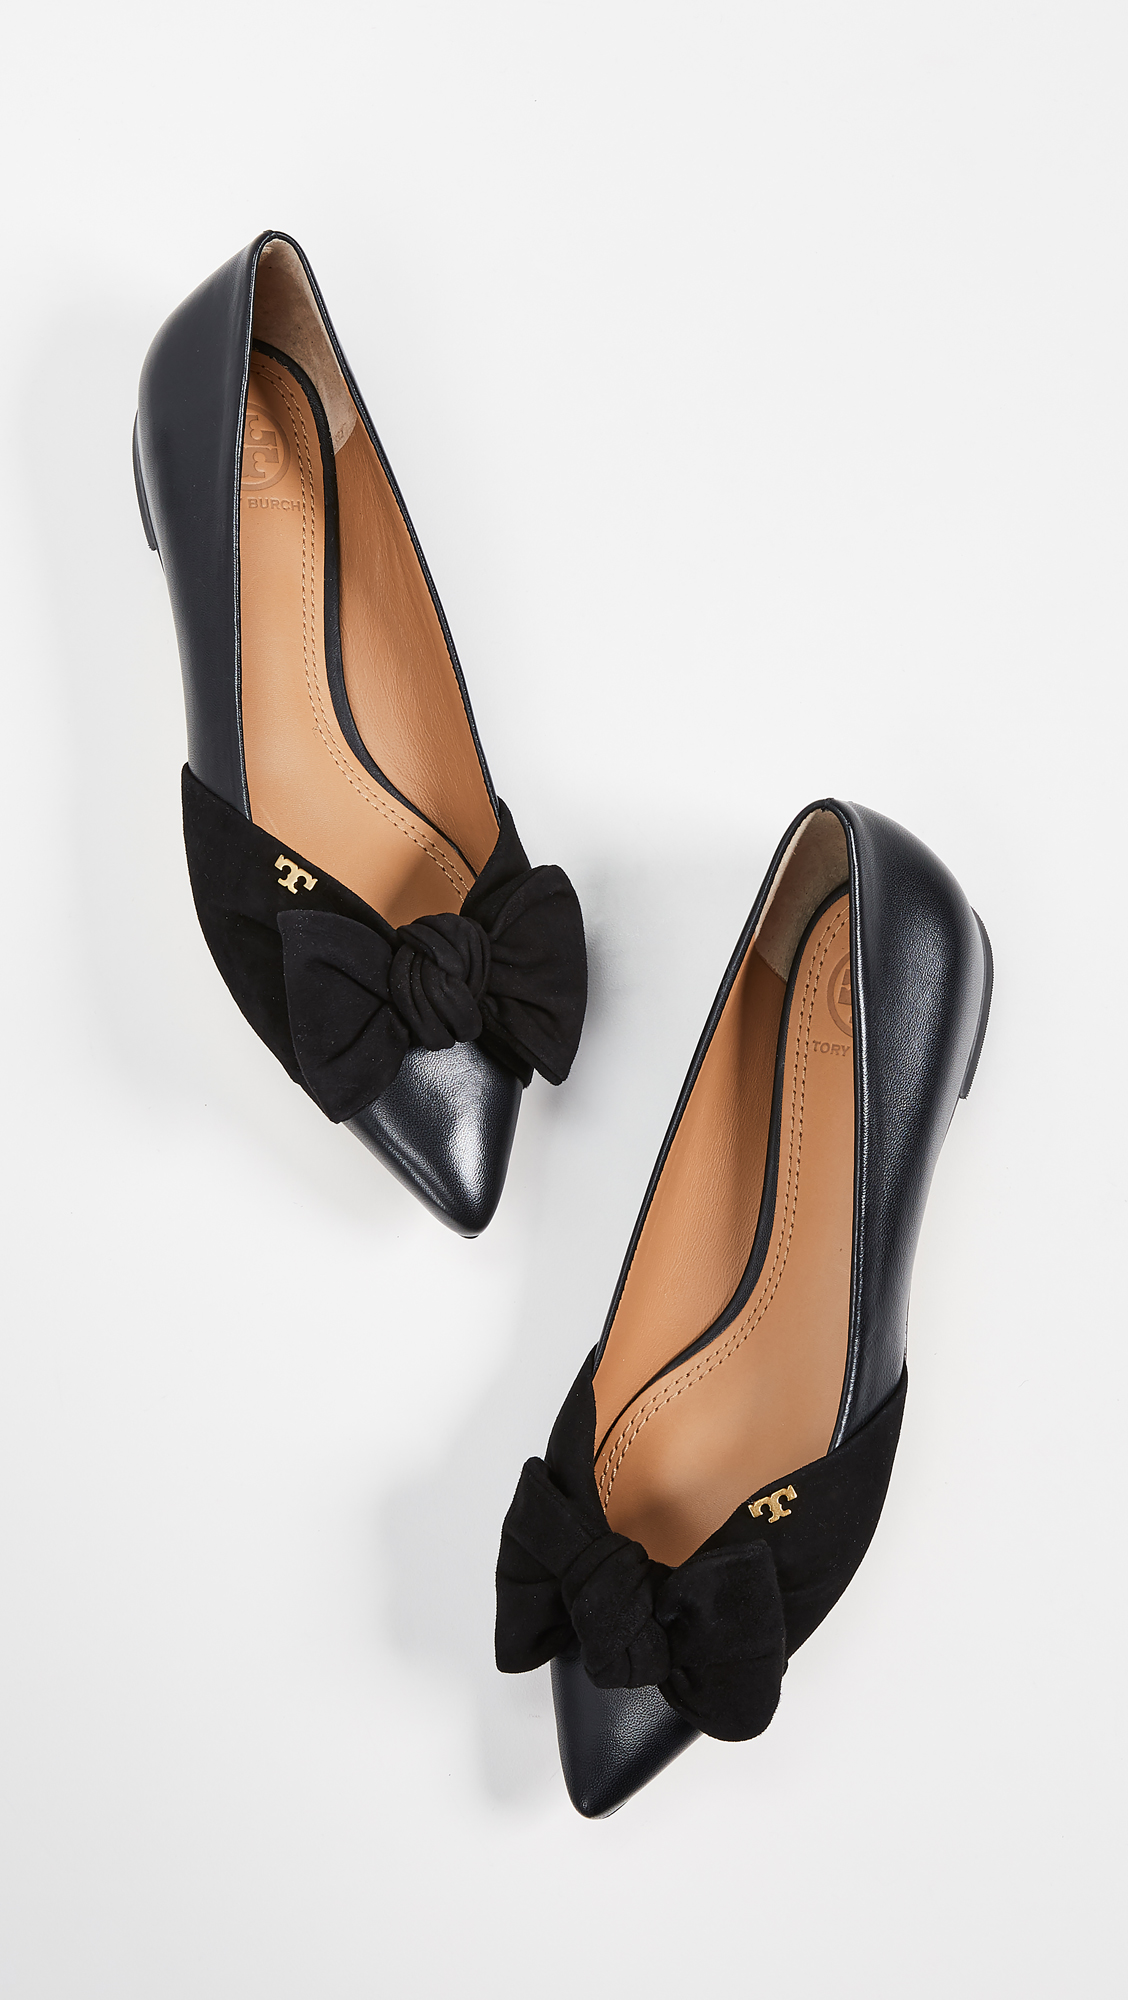 Tory Burch Pointed Toe Flats